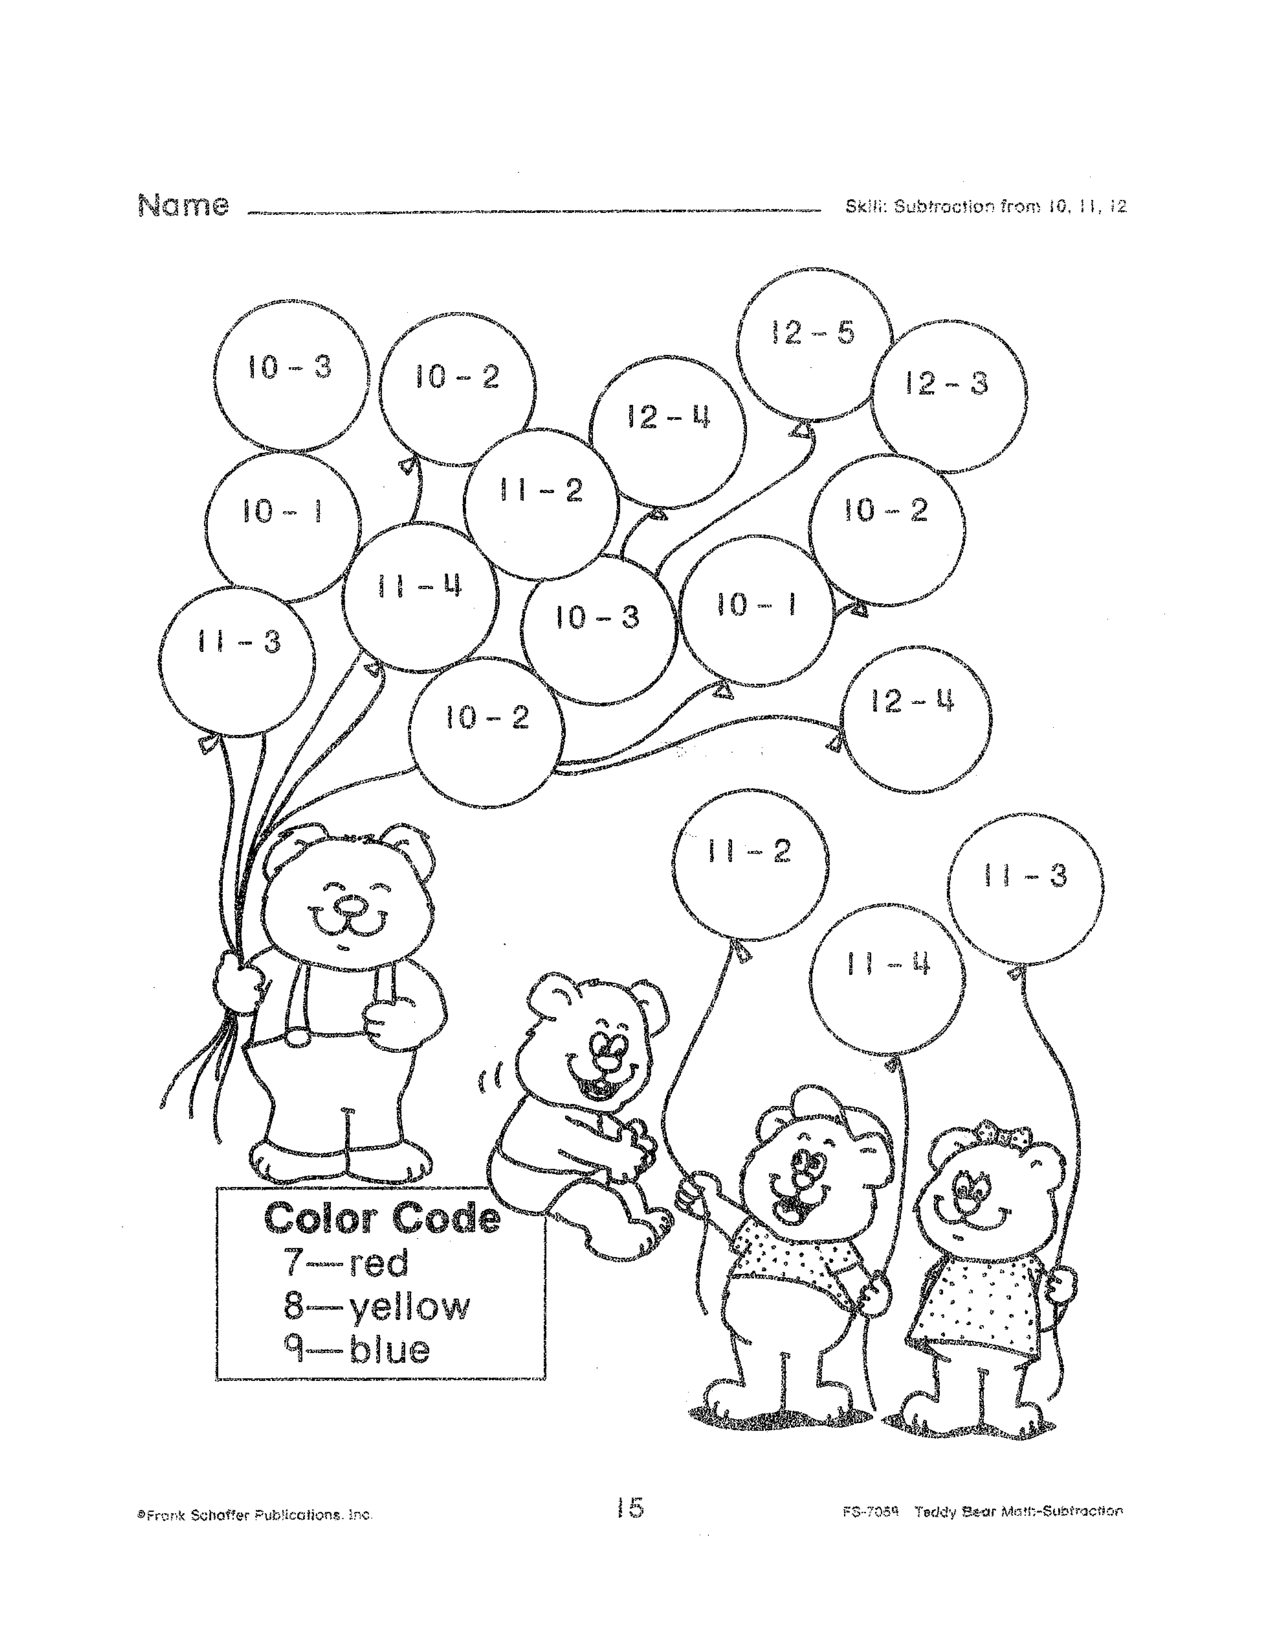 11 Best Images of Fun Math Puzzle Worksheets For 2nd Grade - Math Word Search Puzzles Printable ...